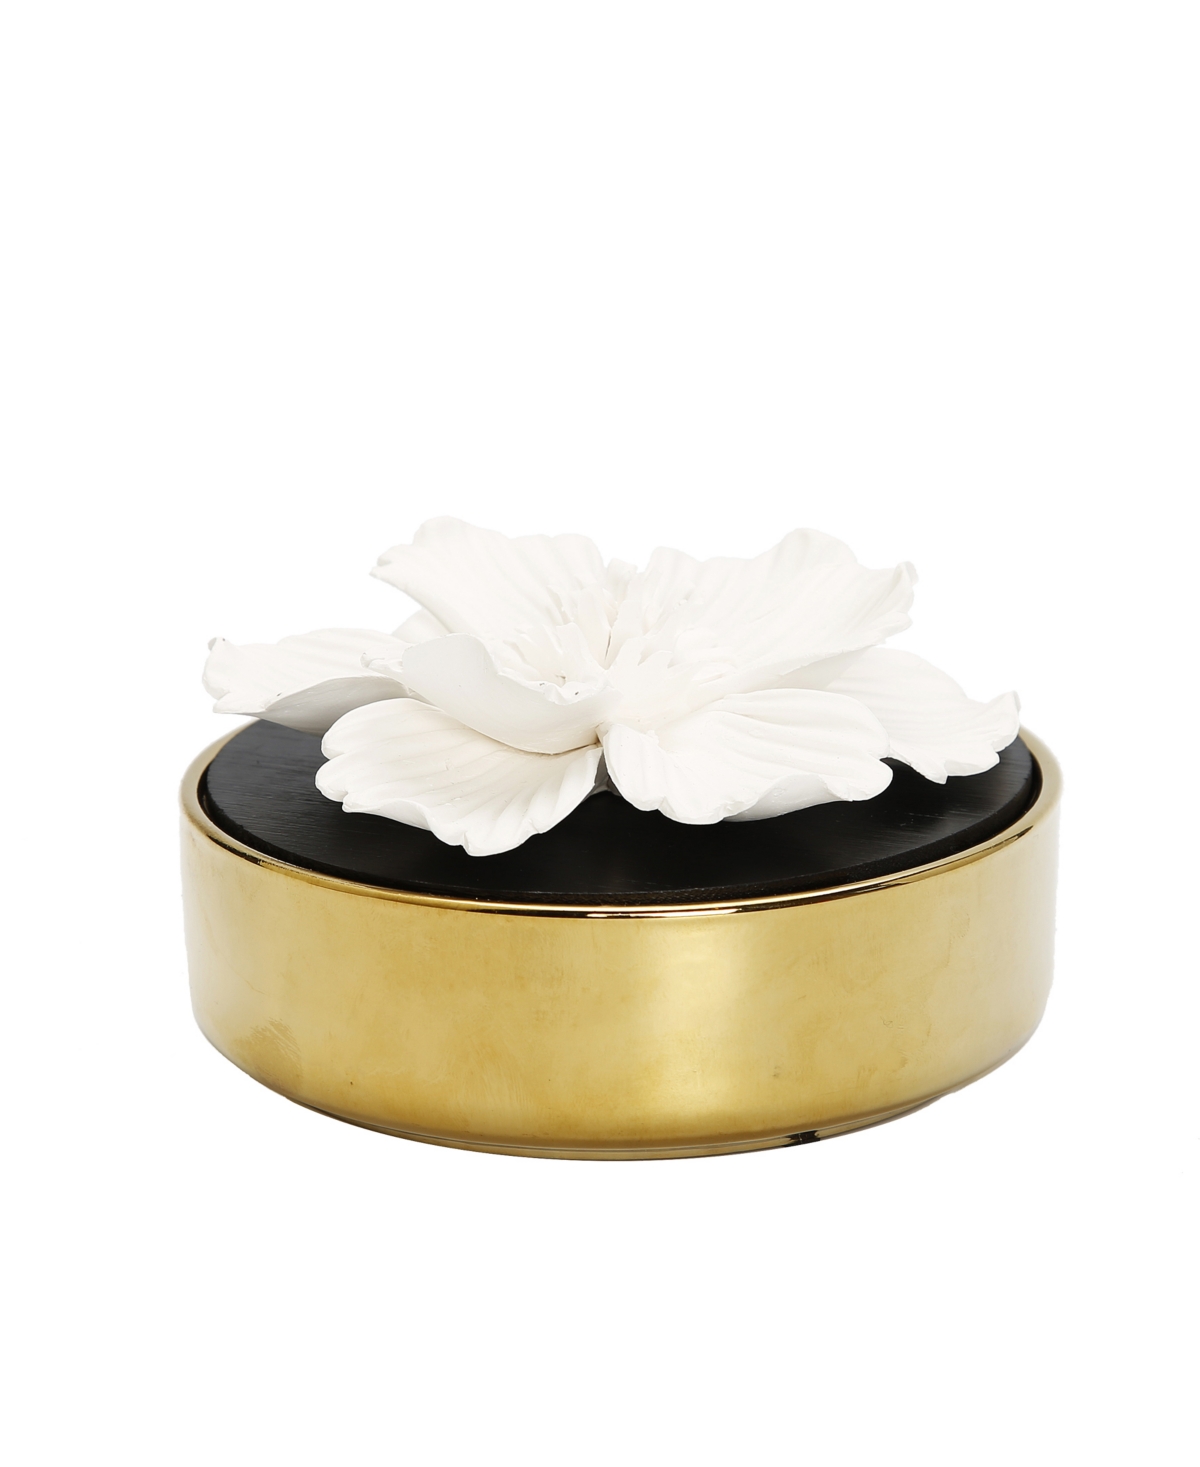 Glossy Hemispheric Shape Diffuser with Flower, 'English Pear Freesia' Scent - Gold